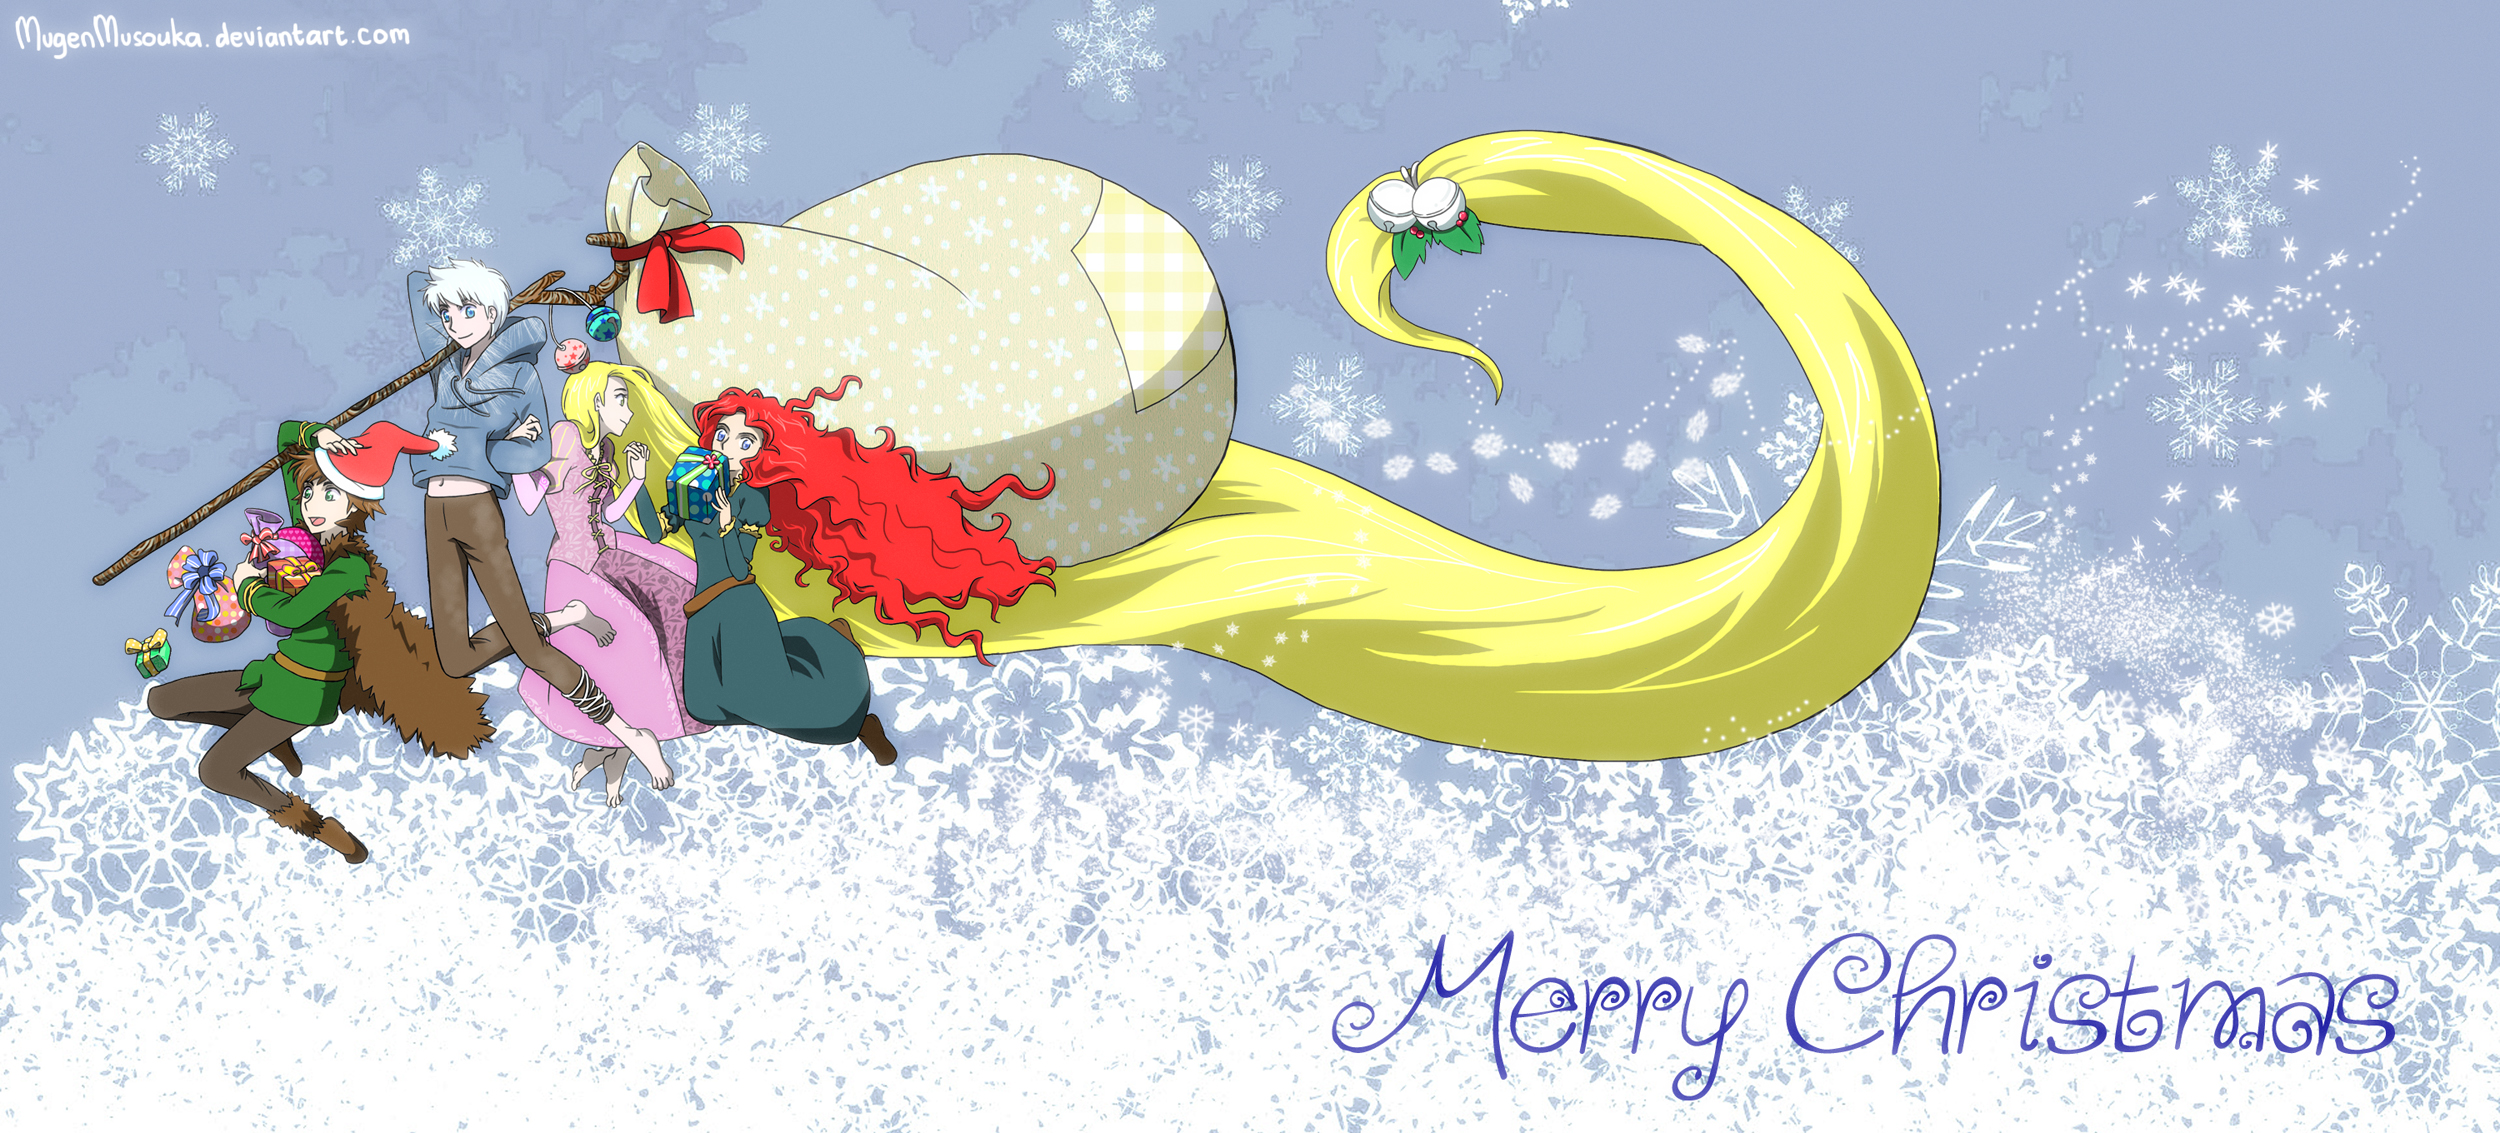 Merry Christmaa by MugenMusouka